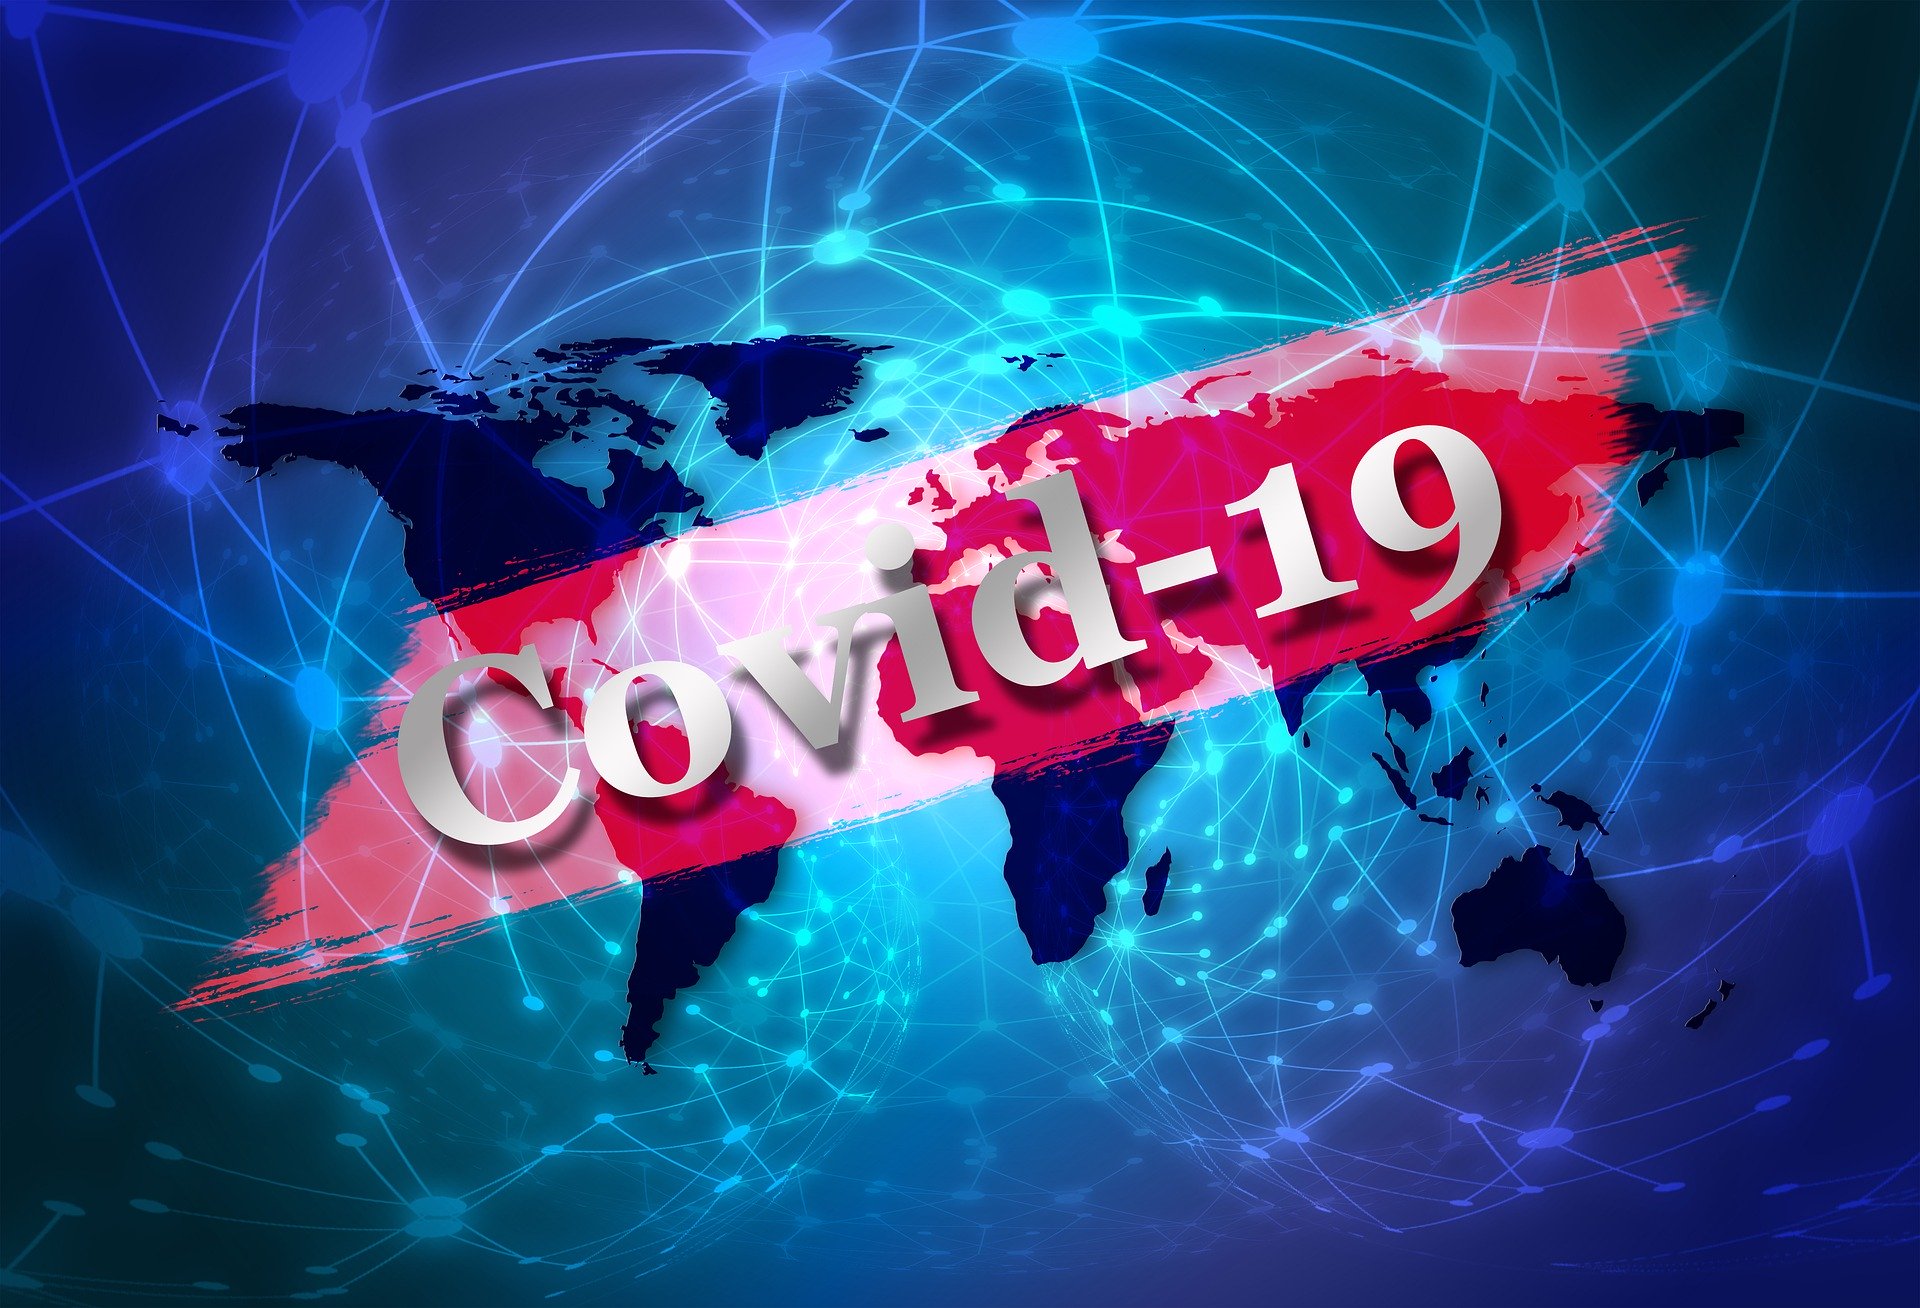 Coronavirus: COVID-19 American map How to Manage Your Business & Legal Risks